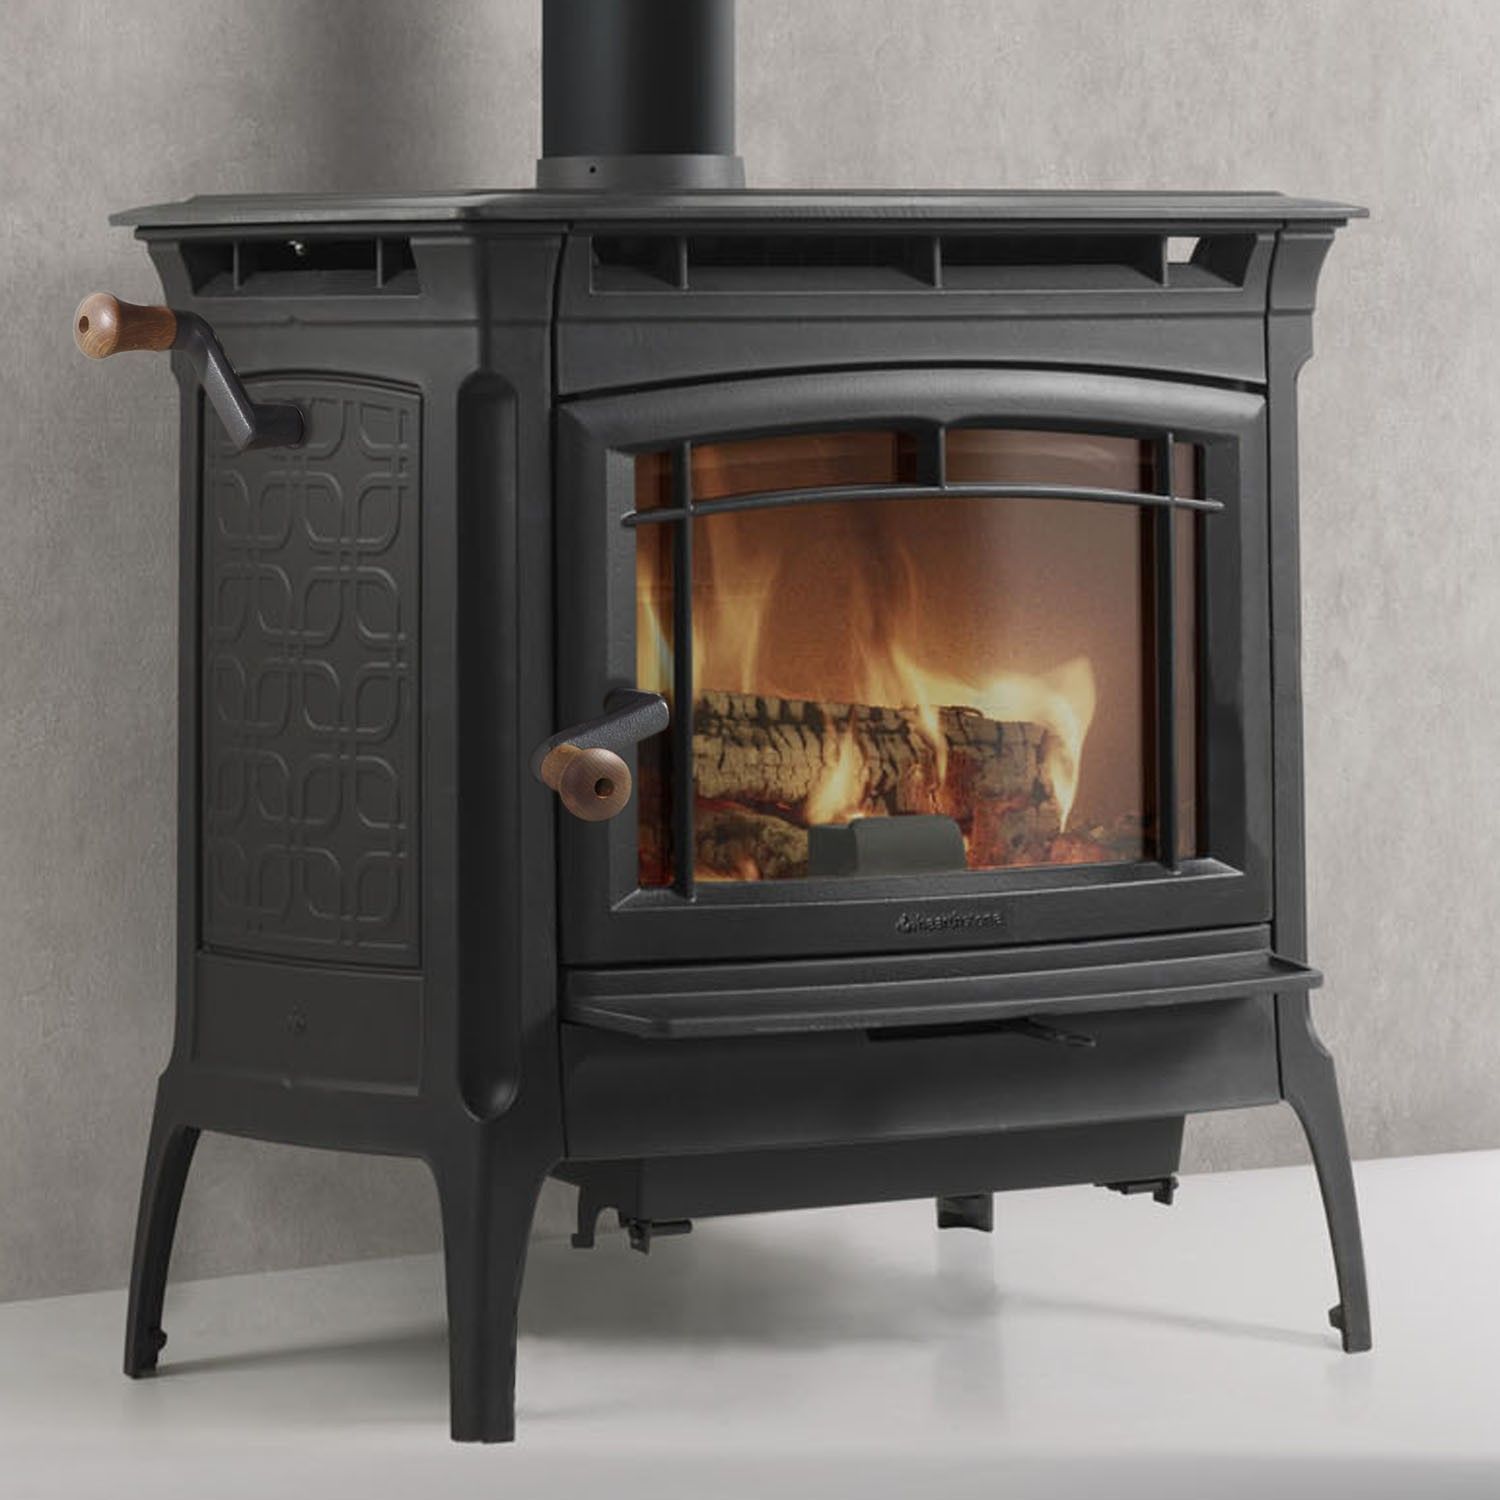 Coal Fireplace Unique Pin by Do Wrocklage Harp On Home